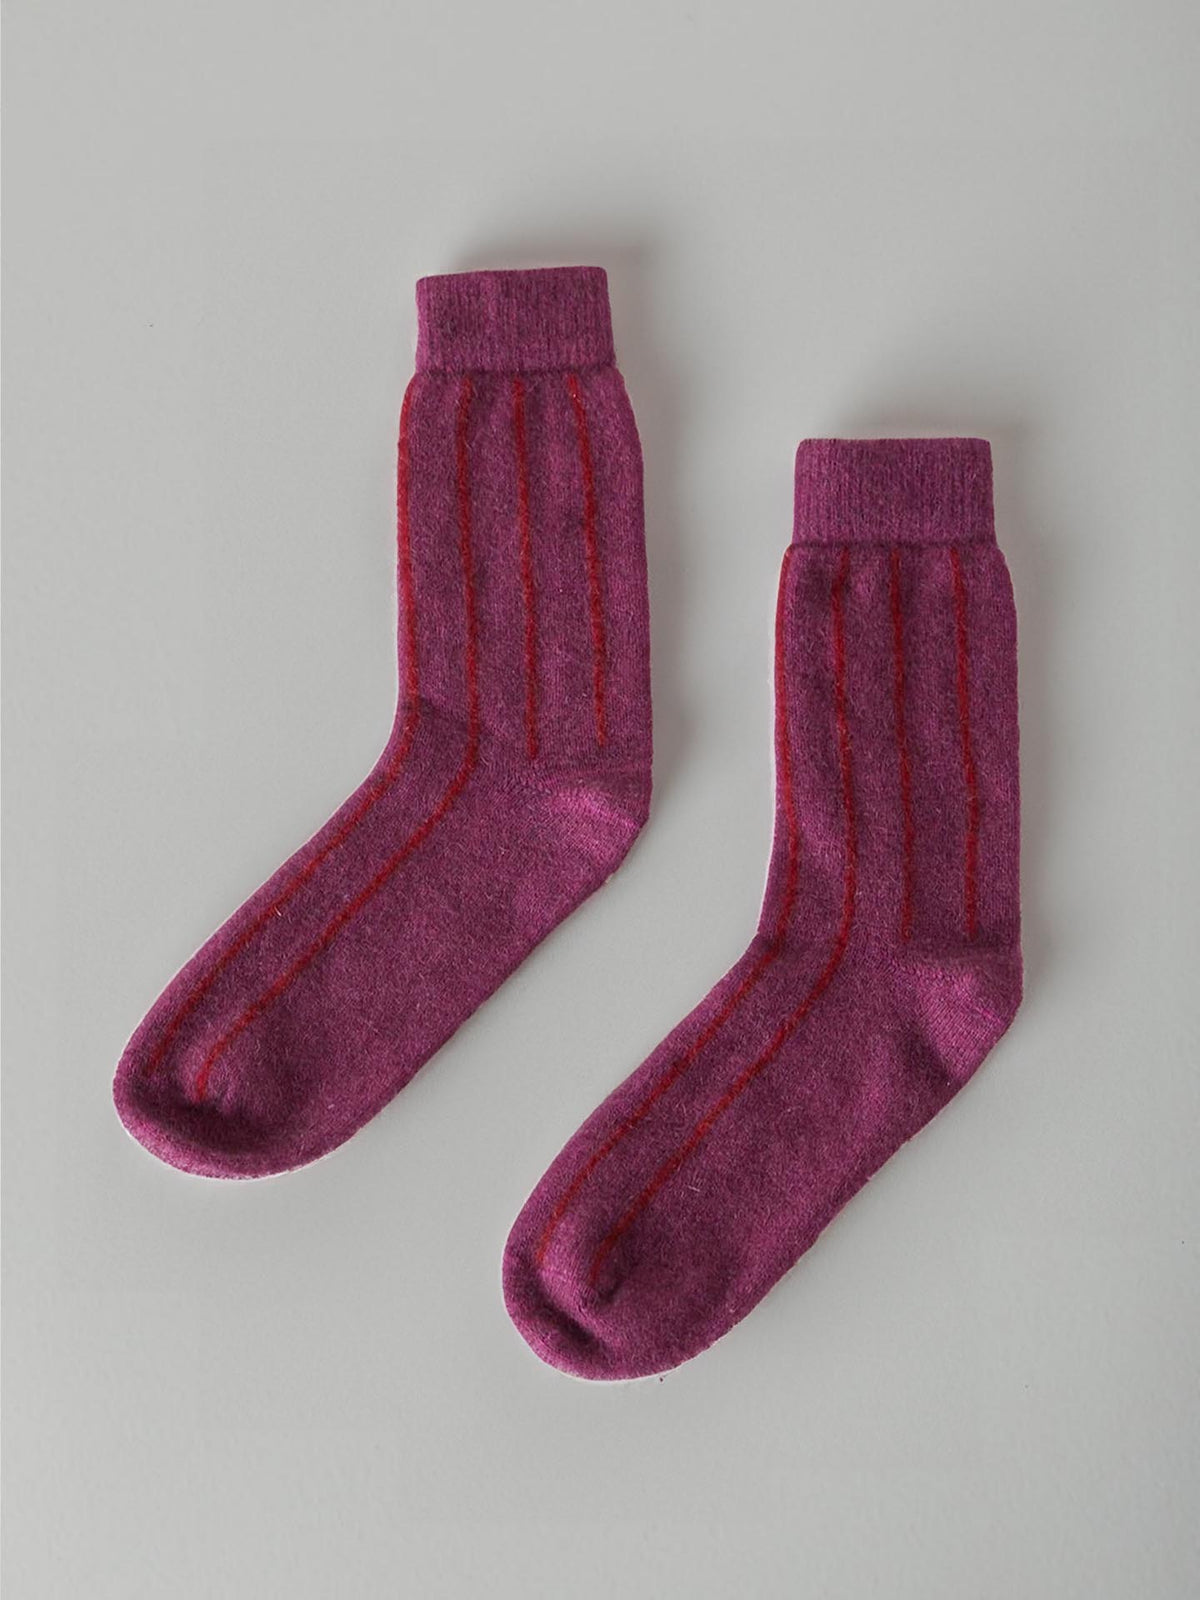 A pair of Francie Possum Merino Socks in Orchid &amp; Poppy Stripe, displayed on a light grey background.